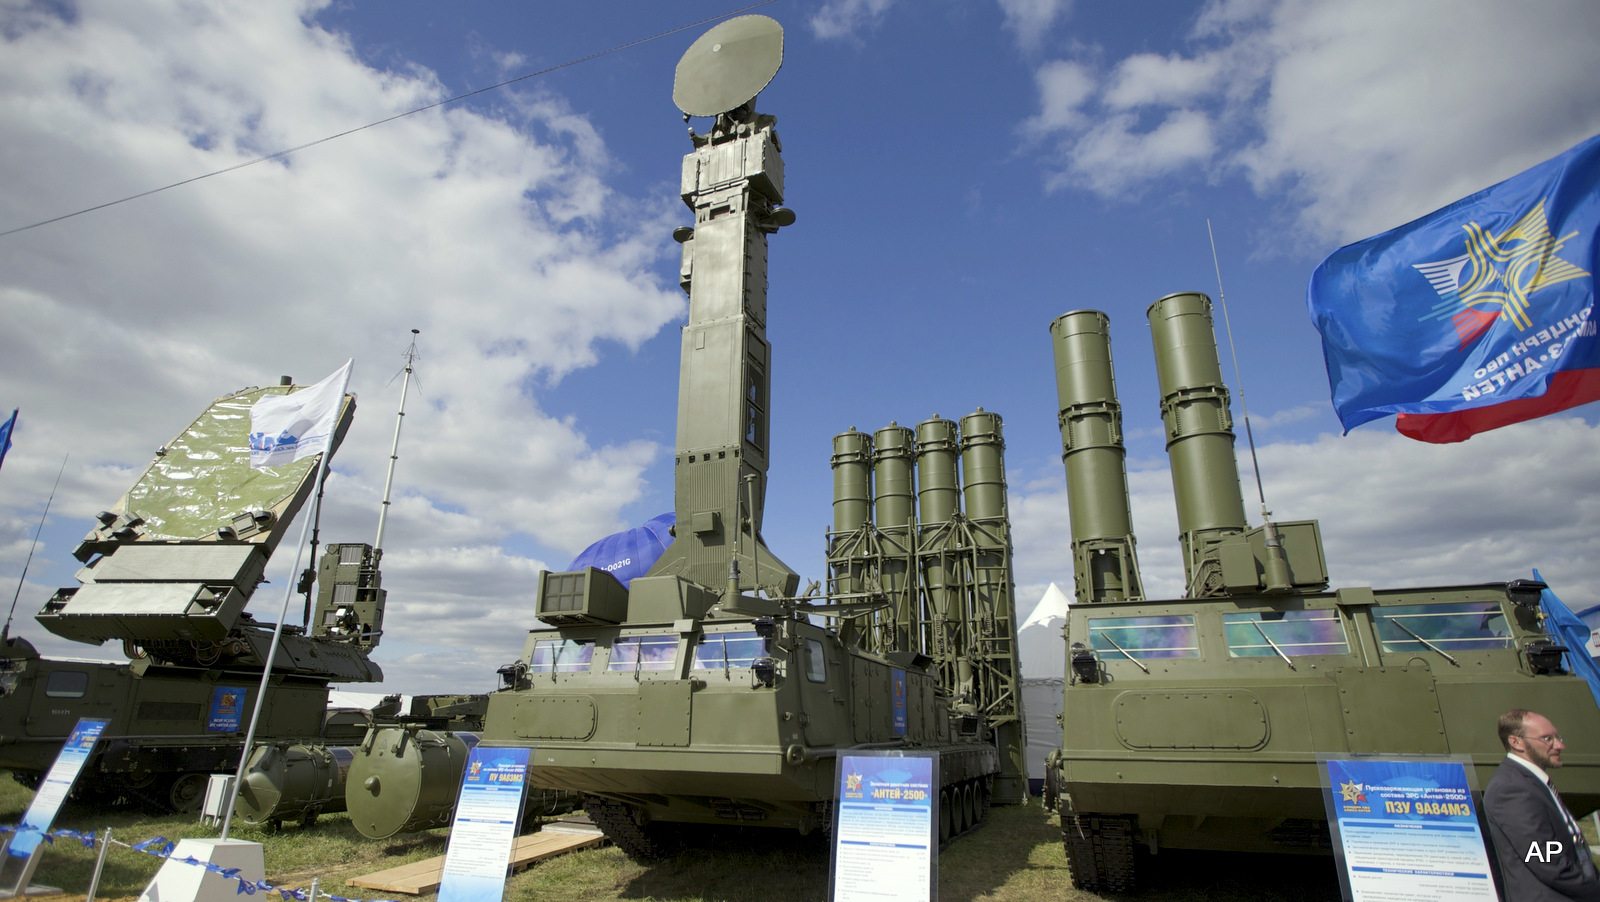 Russian air defense system missile system Antey 2500, or S-300 VM, is on display at the opening of the MAKS Air Show in Zhukovsky outside Moscow, Russia. The Russian military said Tuesday it had deployed the S-300 air defense missile systems to Syria to protect a Russian navy facility in the Syrian port of Tartus and Russian navy ships in the area.